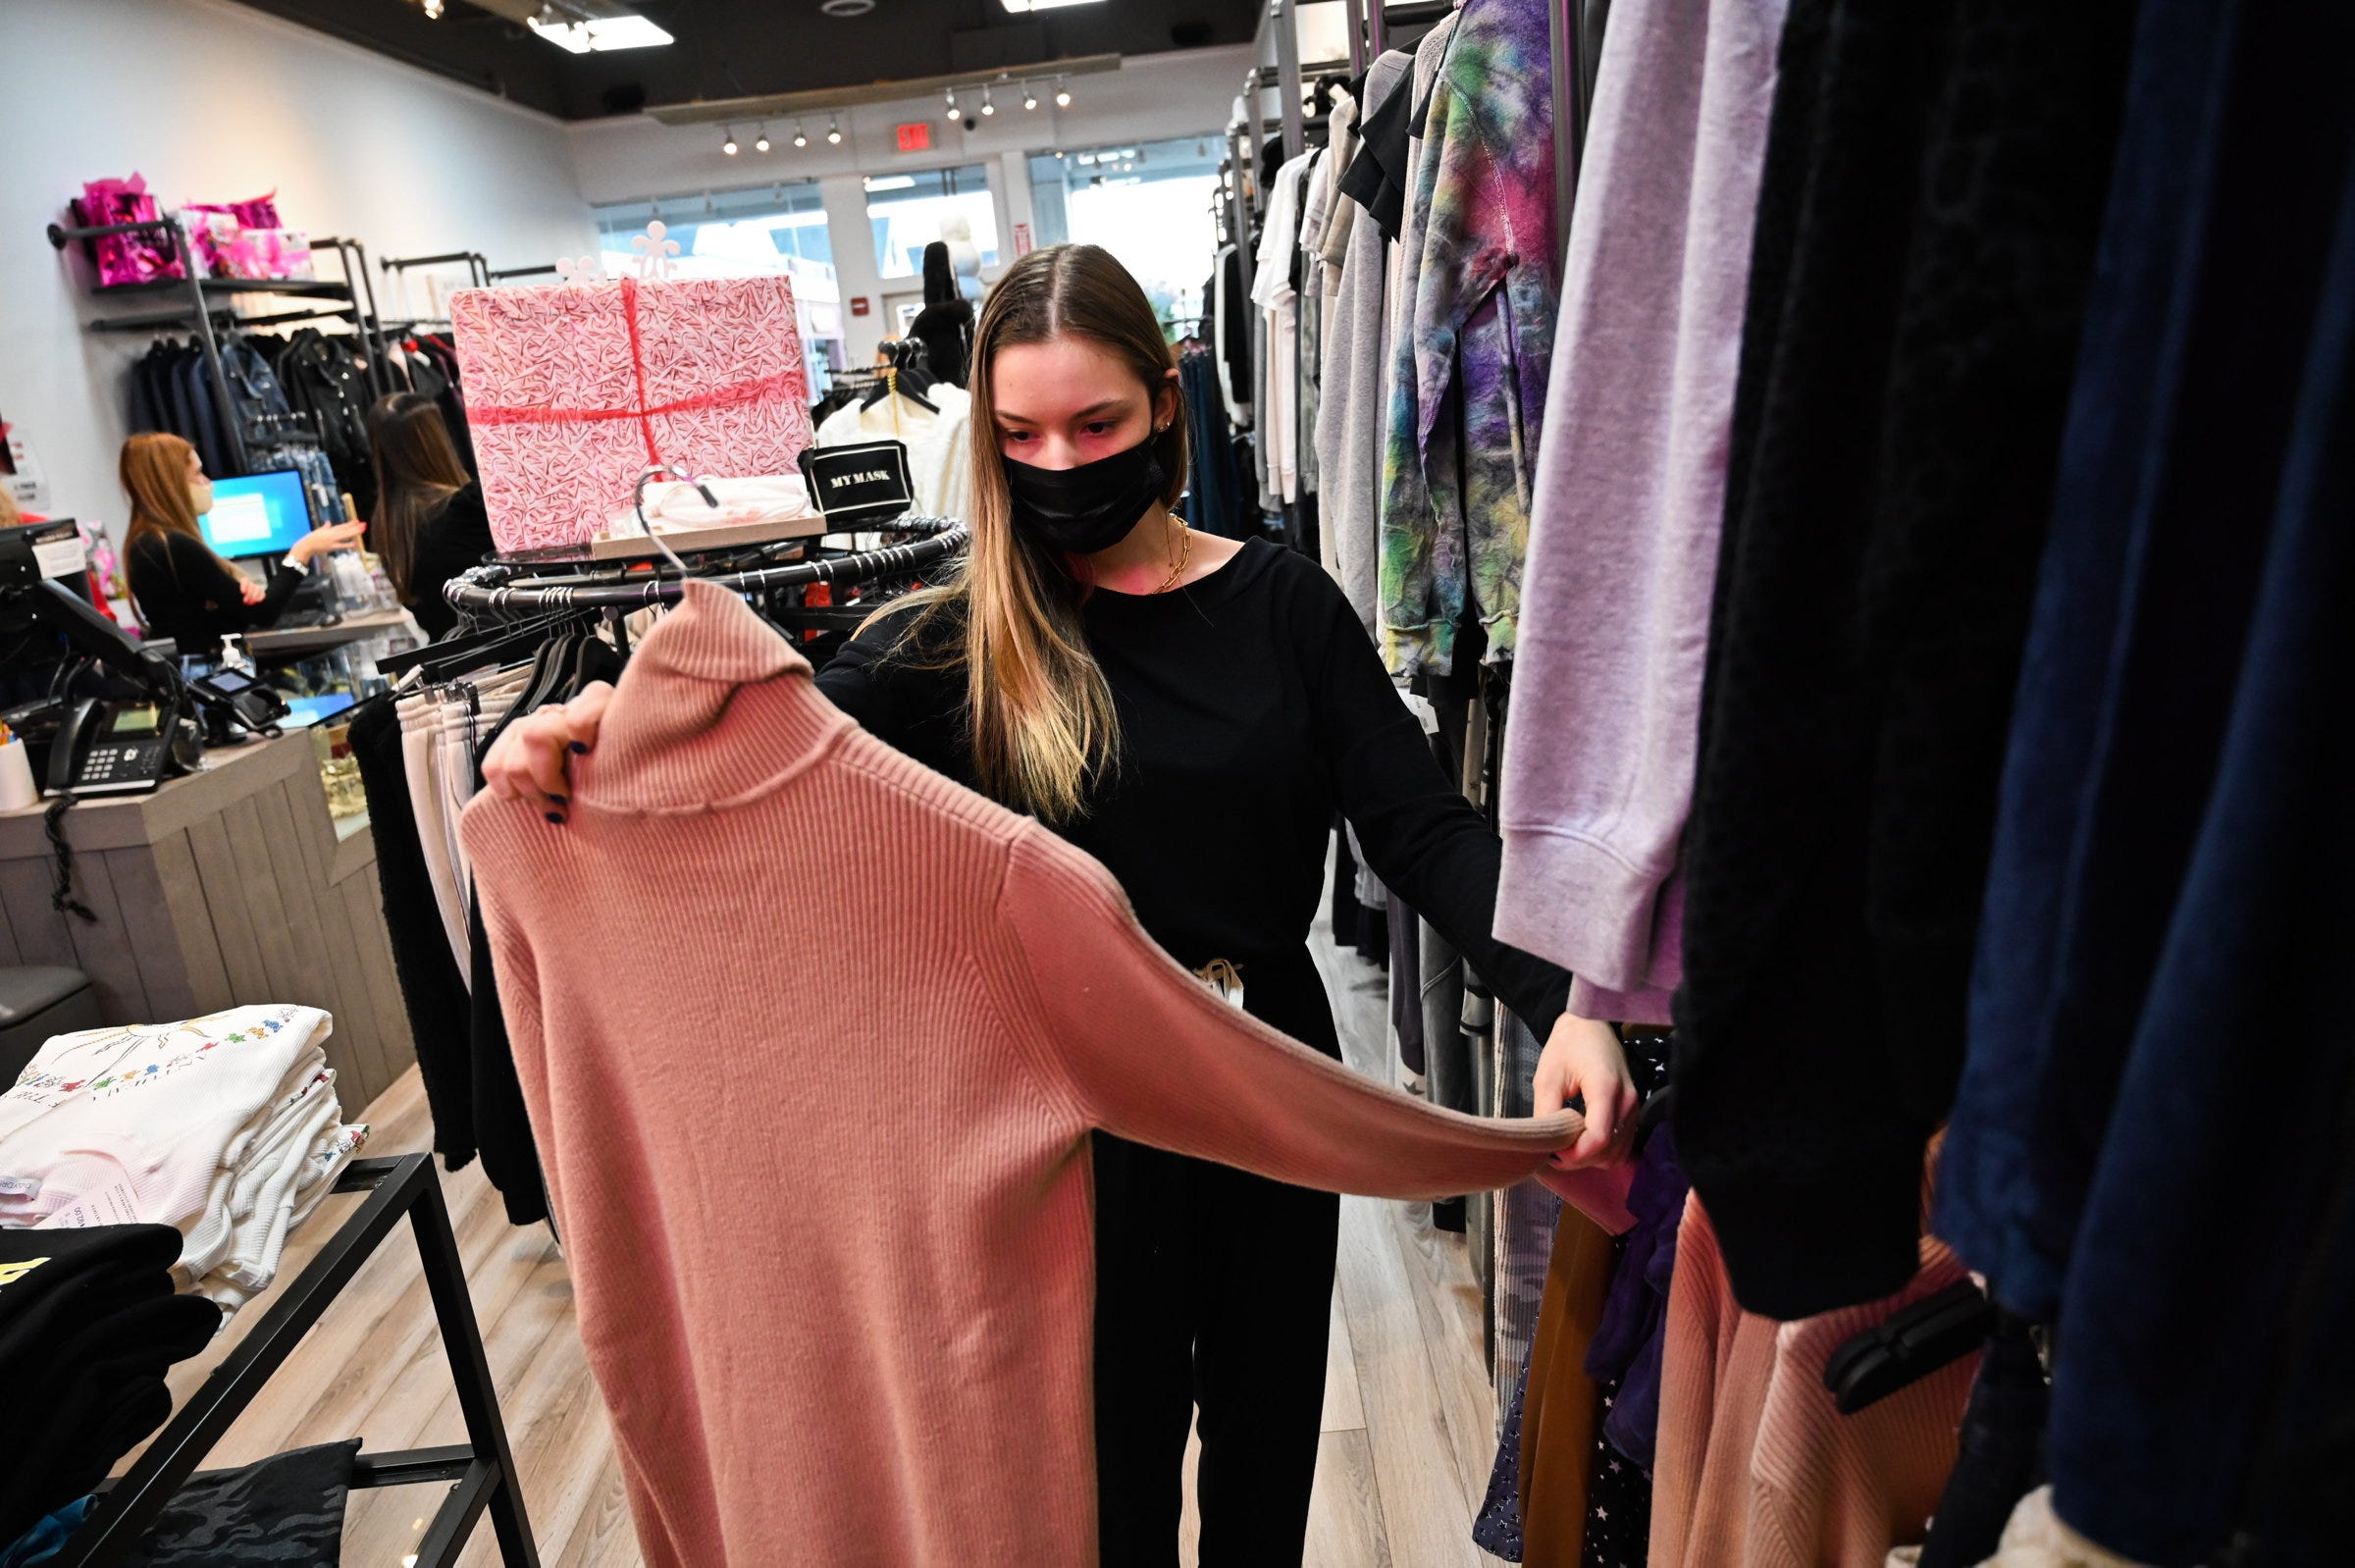 Woman wearing face mask holds up pink turtleneck sweater while clothes shopping